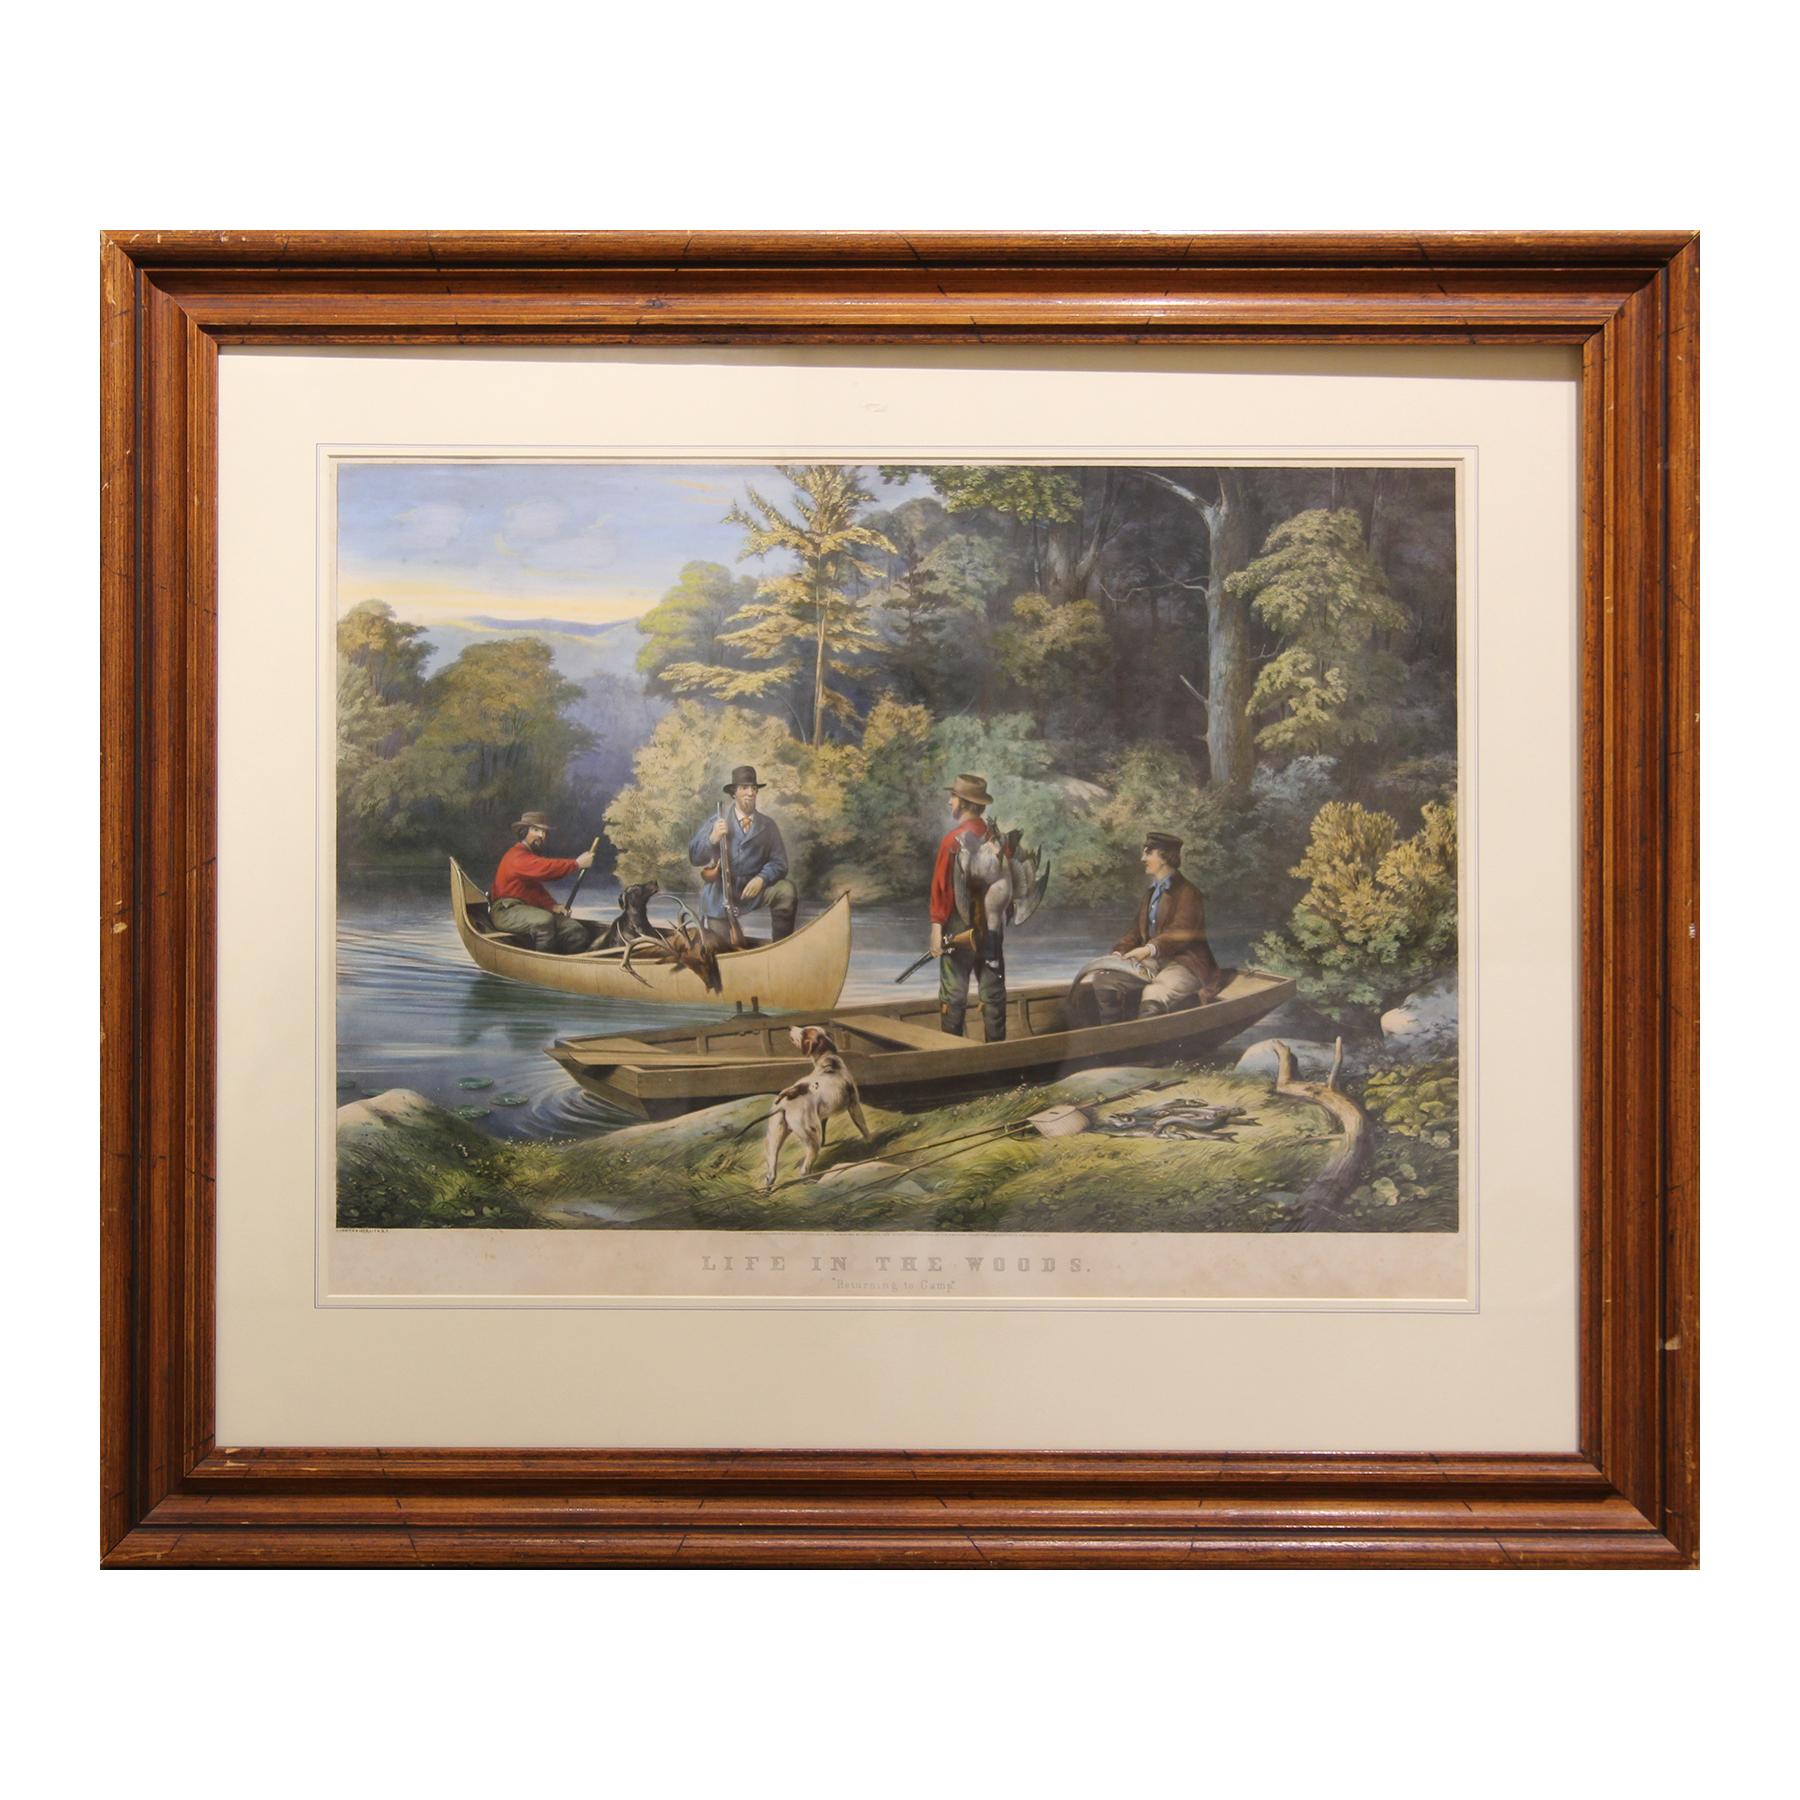 Currier and Ives Landscape Print - “Life in the Woods Returning to Camp” 19th Century Hand Colored Lithograph